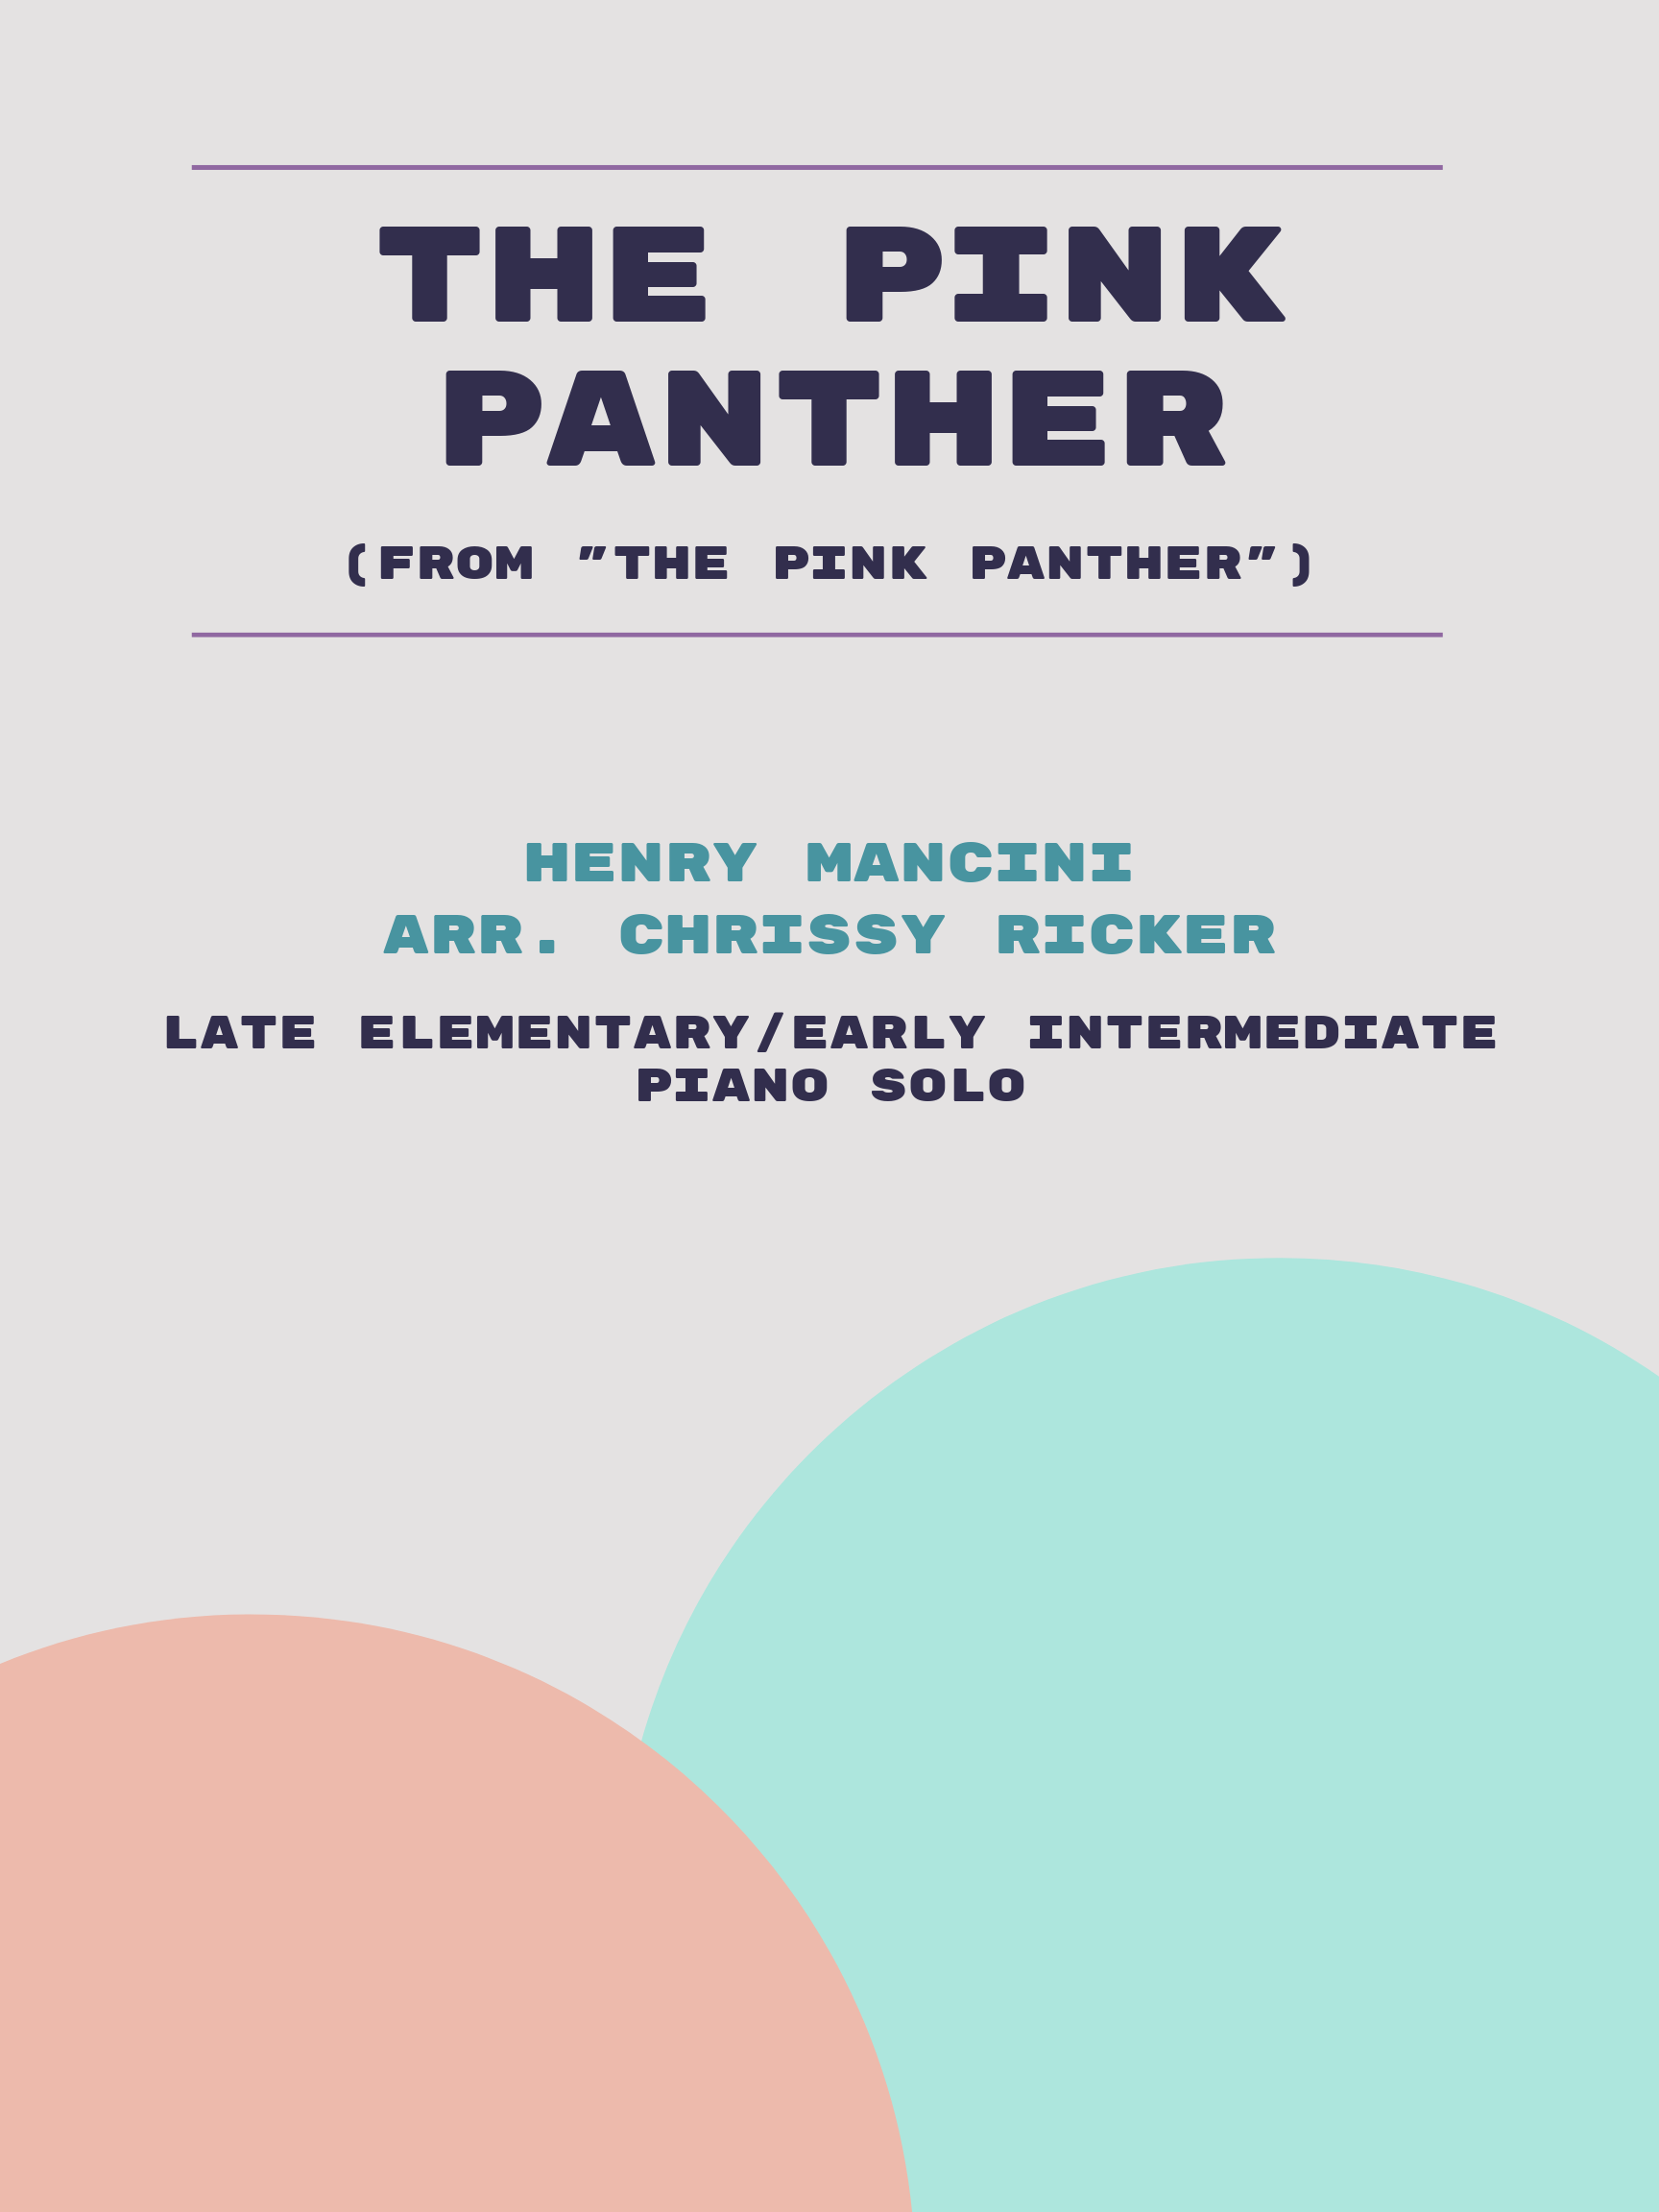 The Pink Panther by Henry Mancini